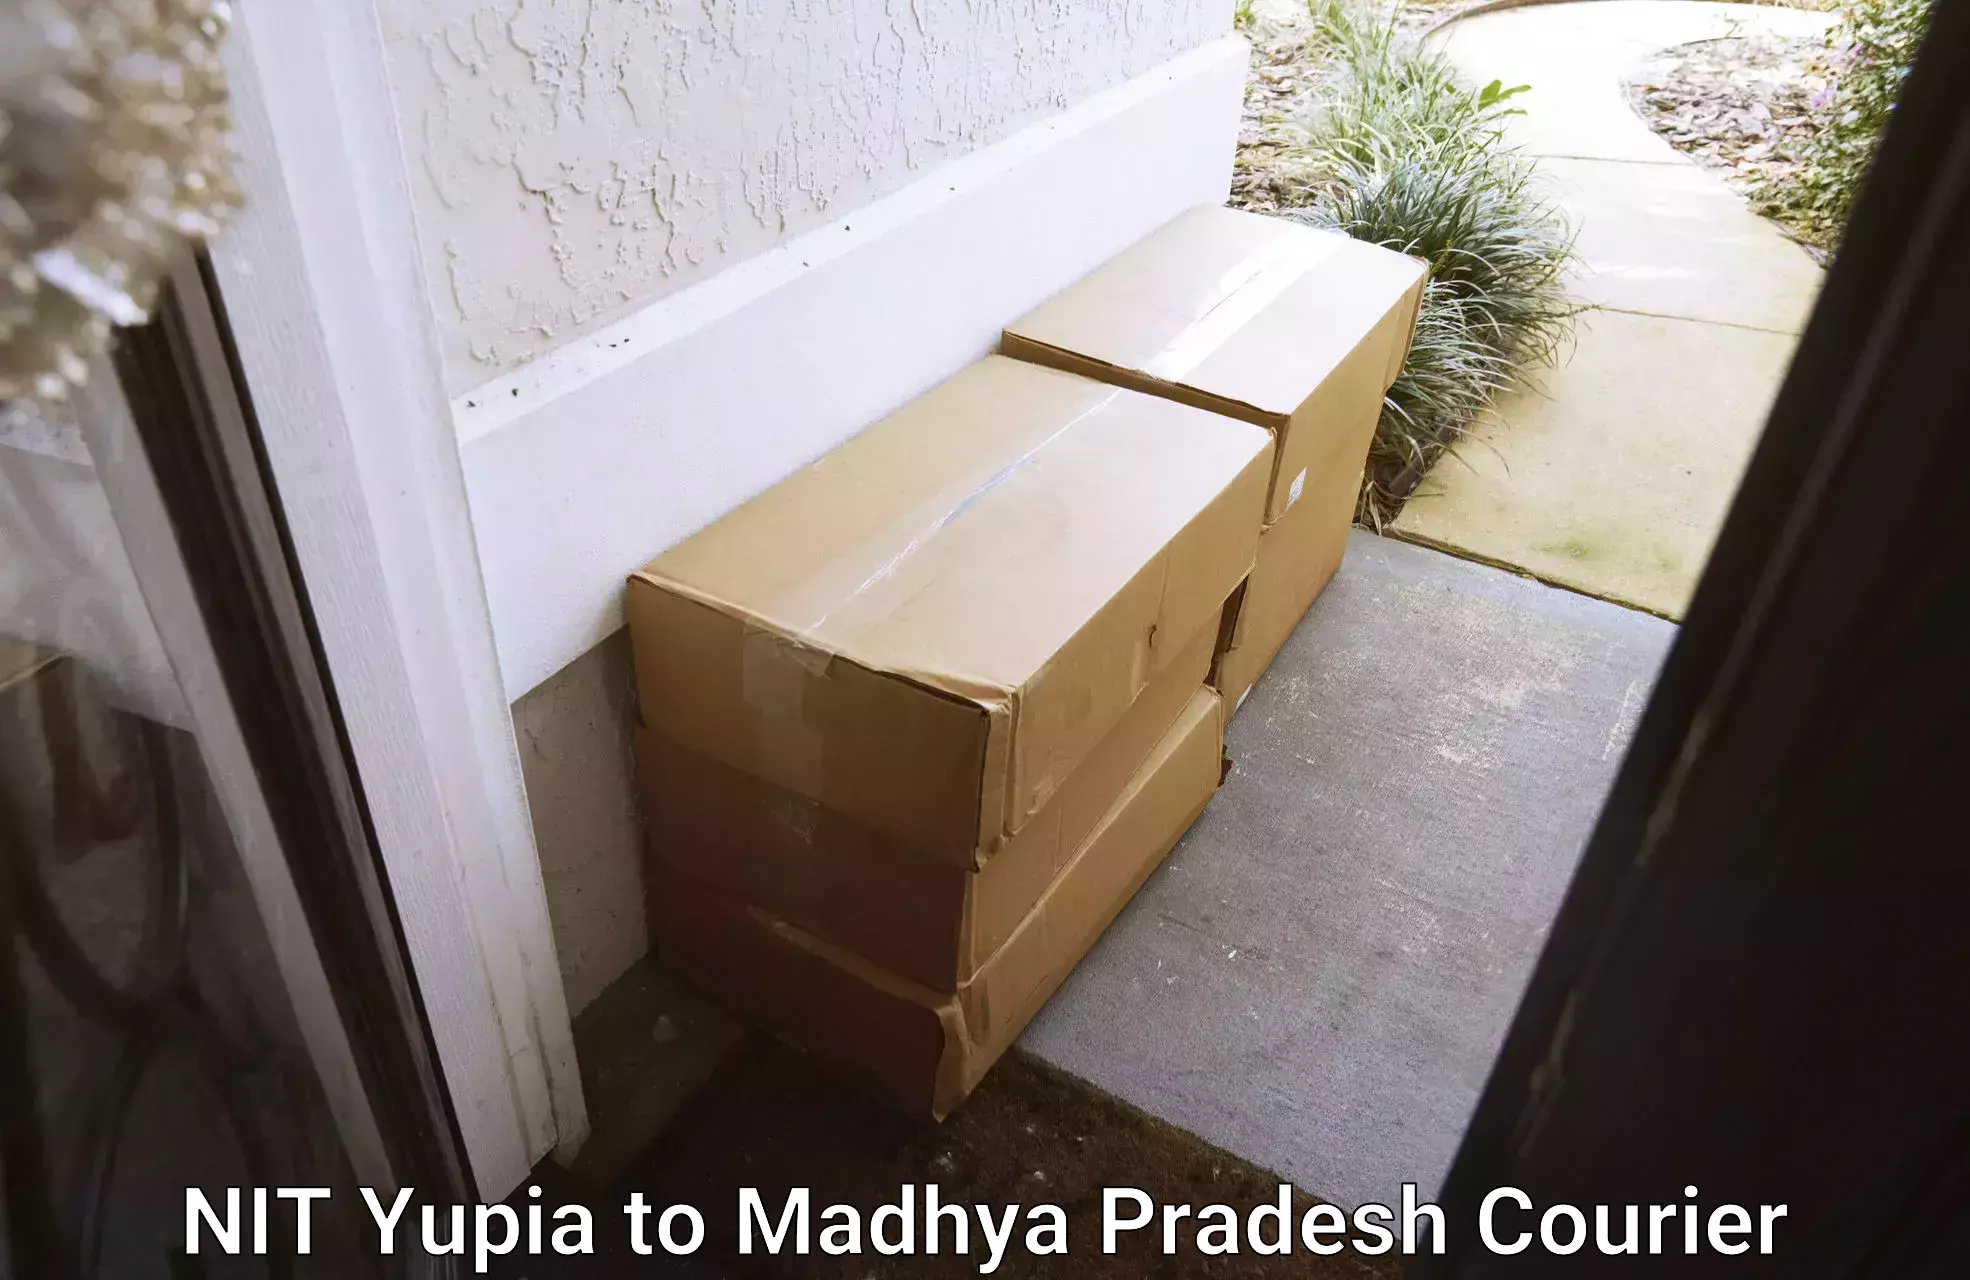 Quality courier services NIT Yupia to Hatta